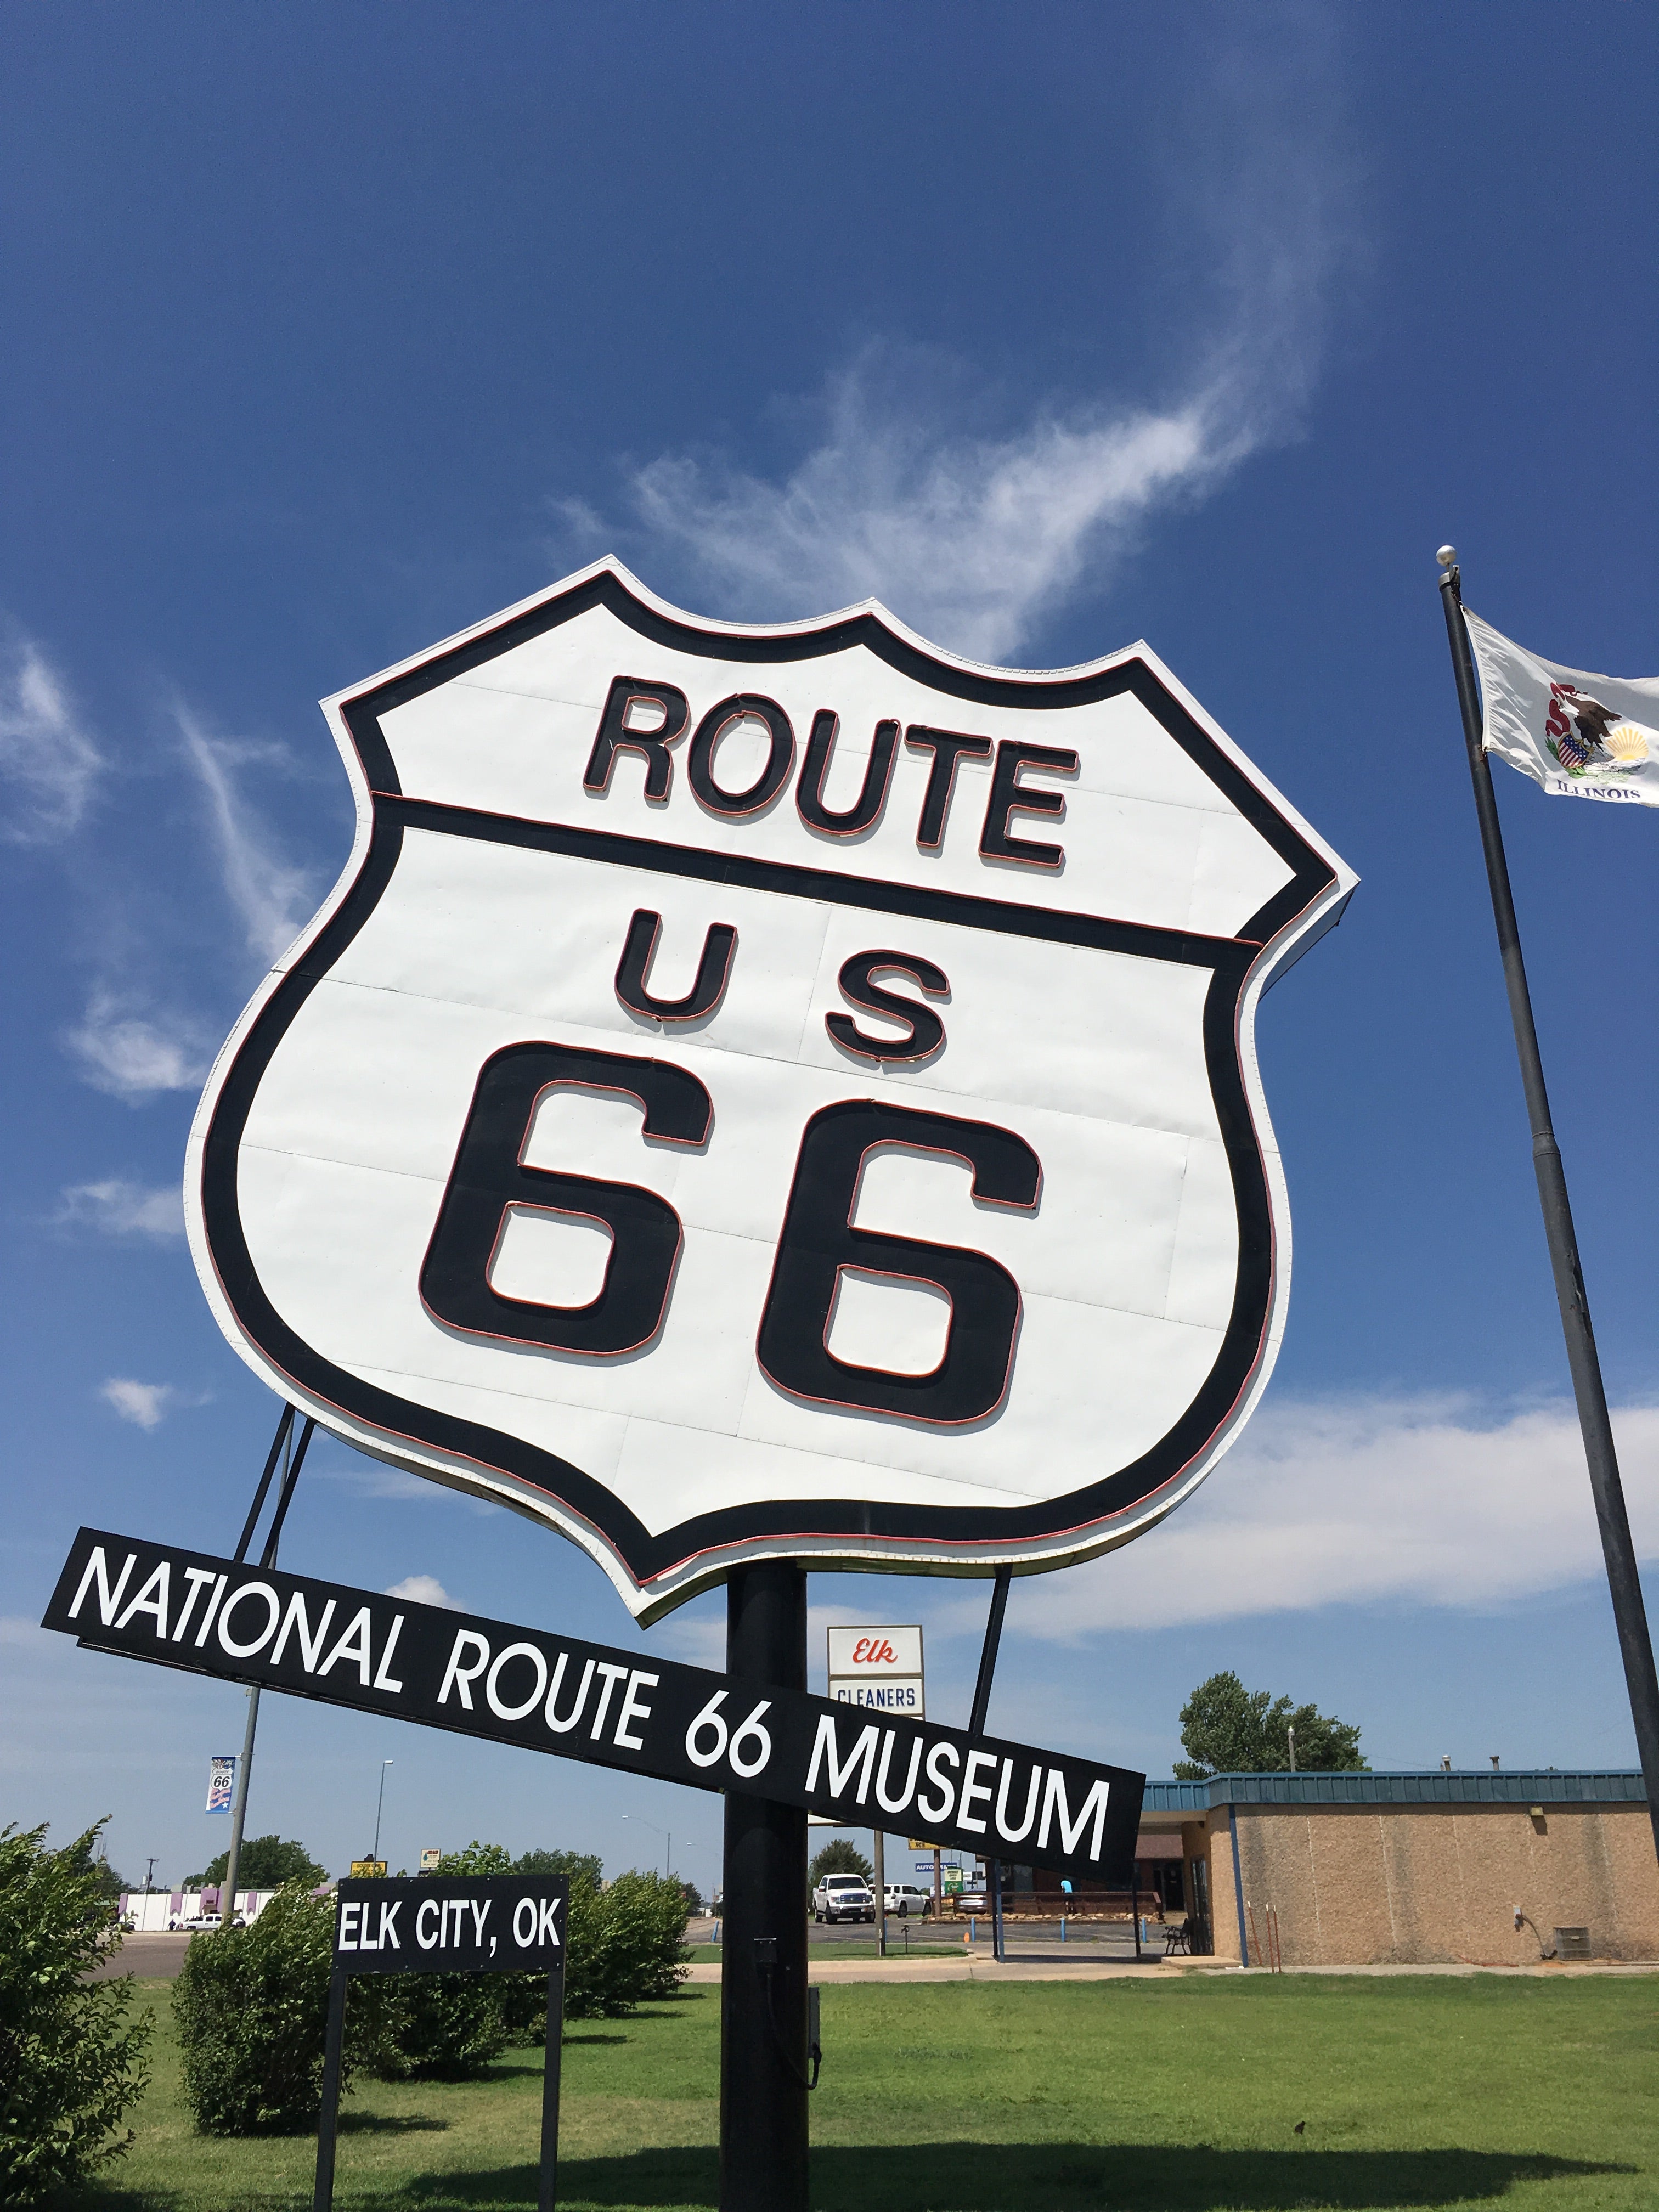 Foss is not too far from the Route 66 Museum